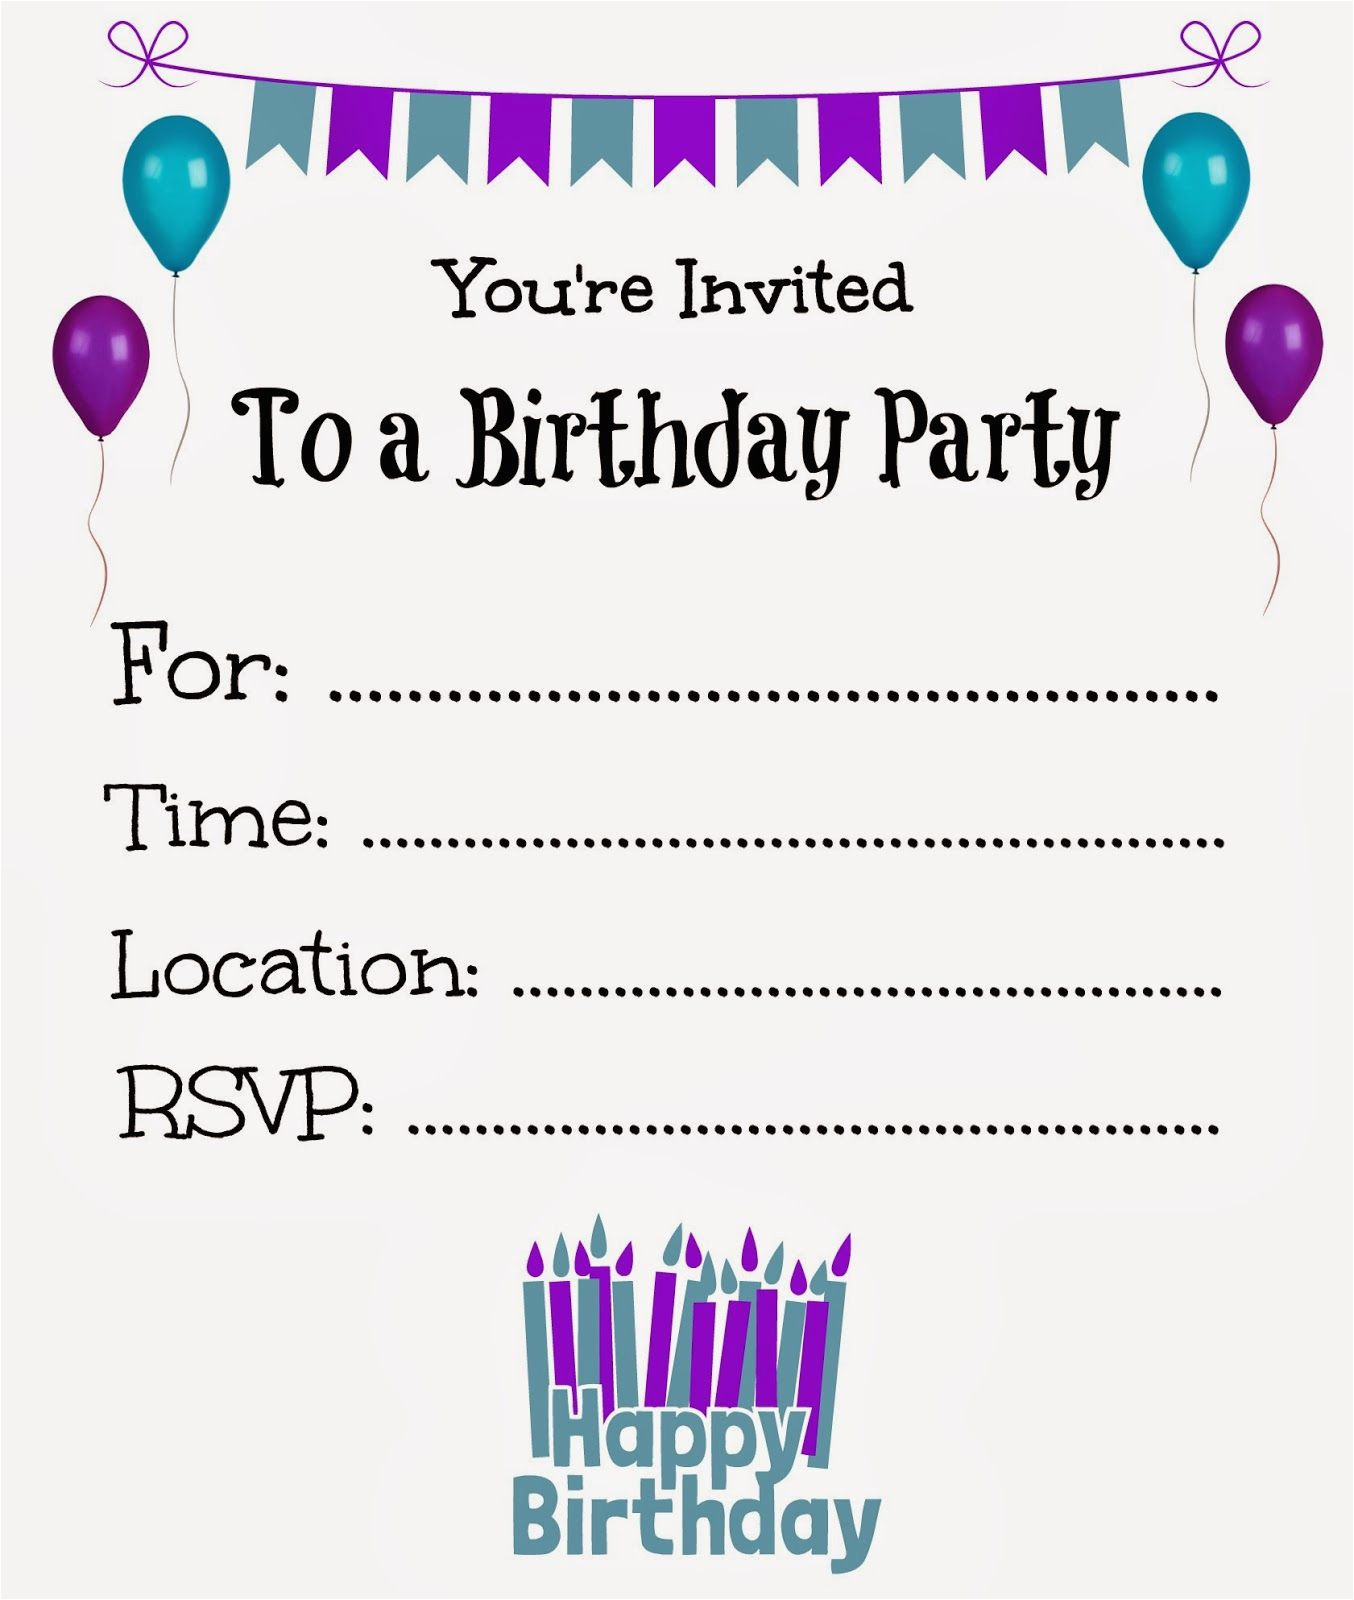 Printable Children S Birthday Party Invitations | Birthdaybuzz - Free Printable Birthday Party Invitations With Photo